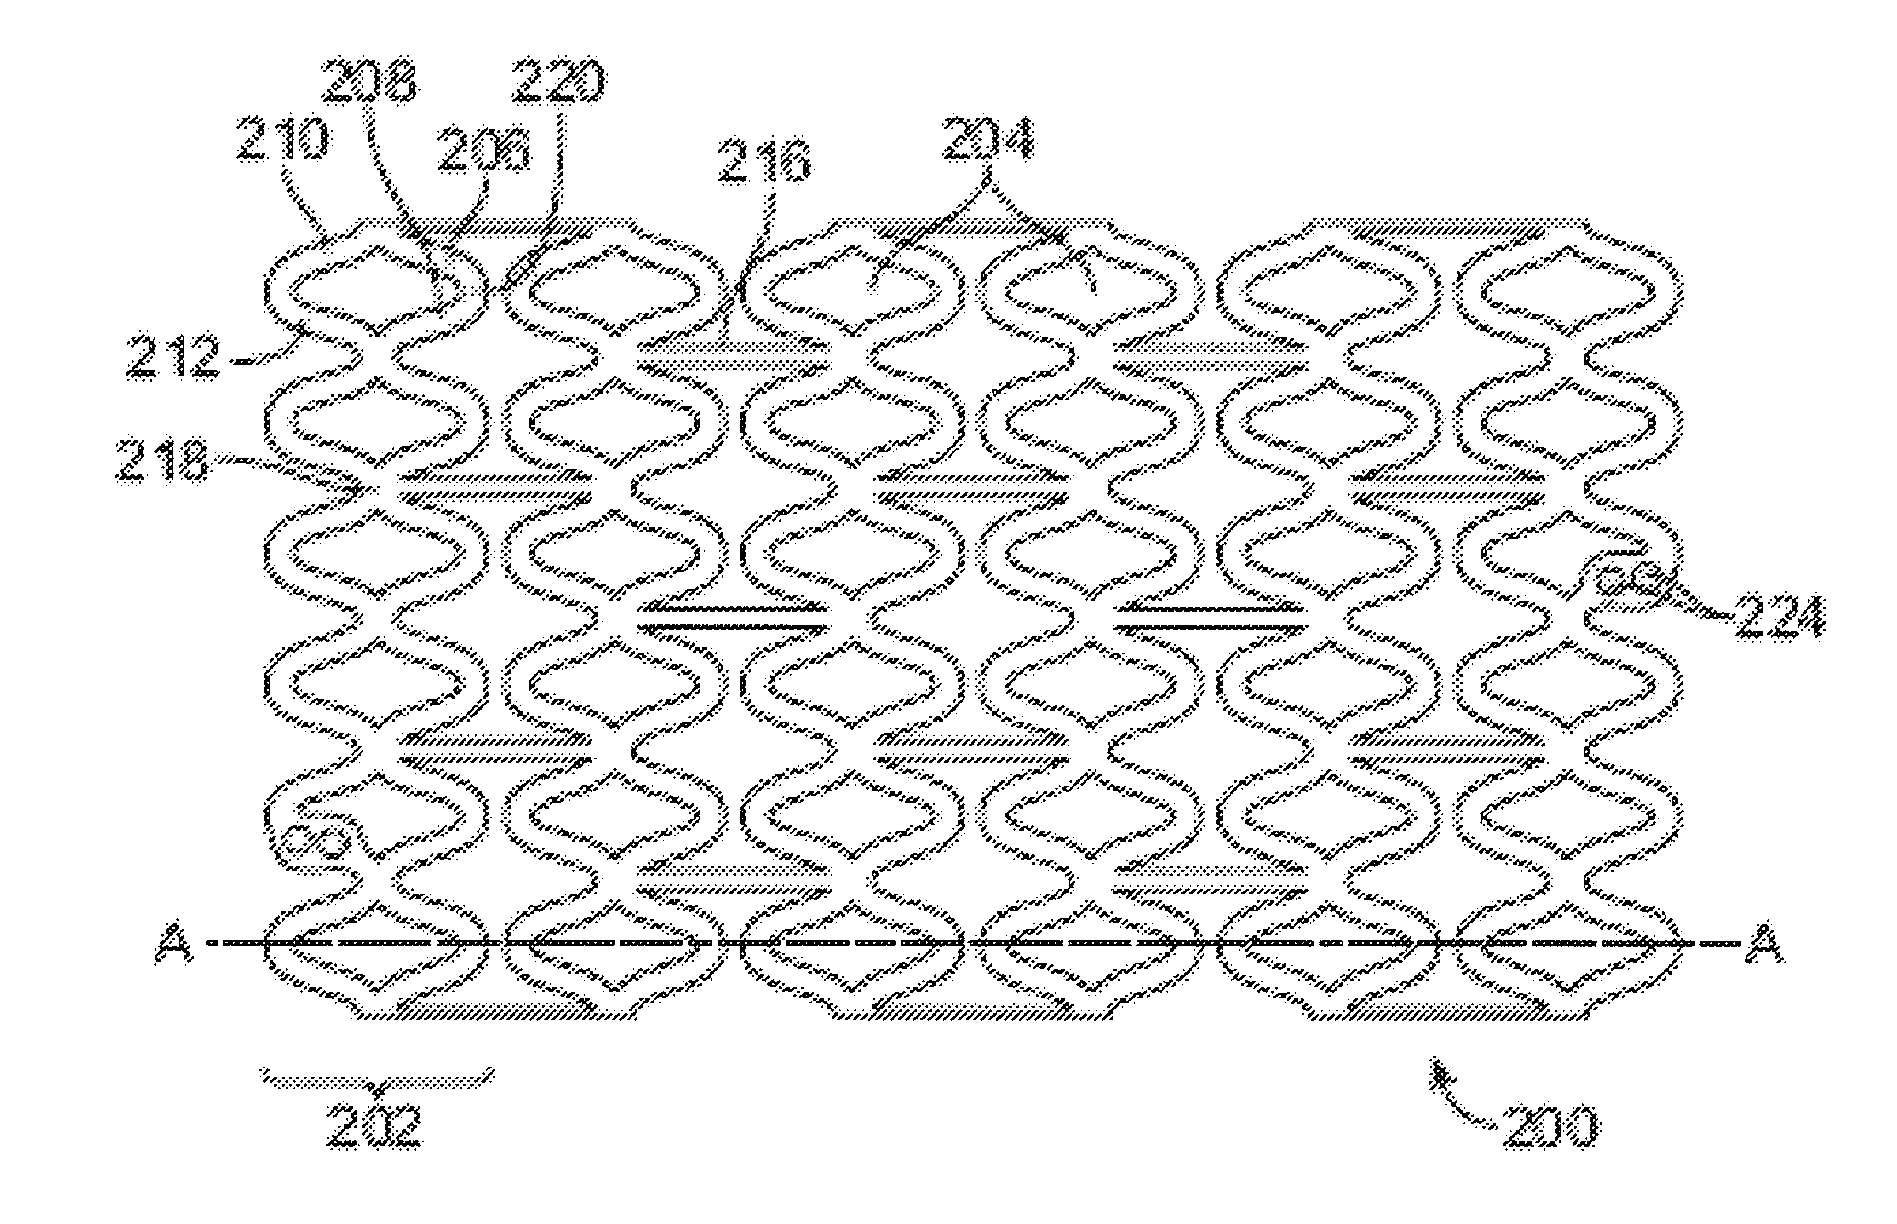 Bioabsorbable Stent With Time Dependent Structure And Properties And Regio-Selective Degradation